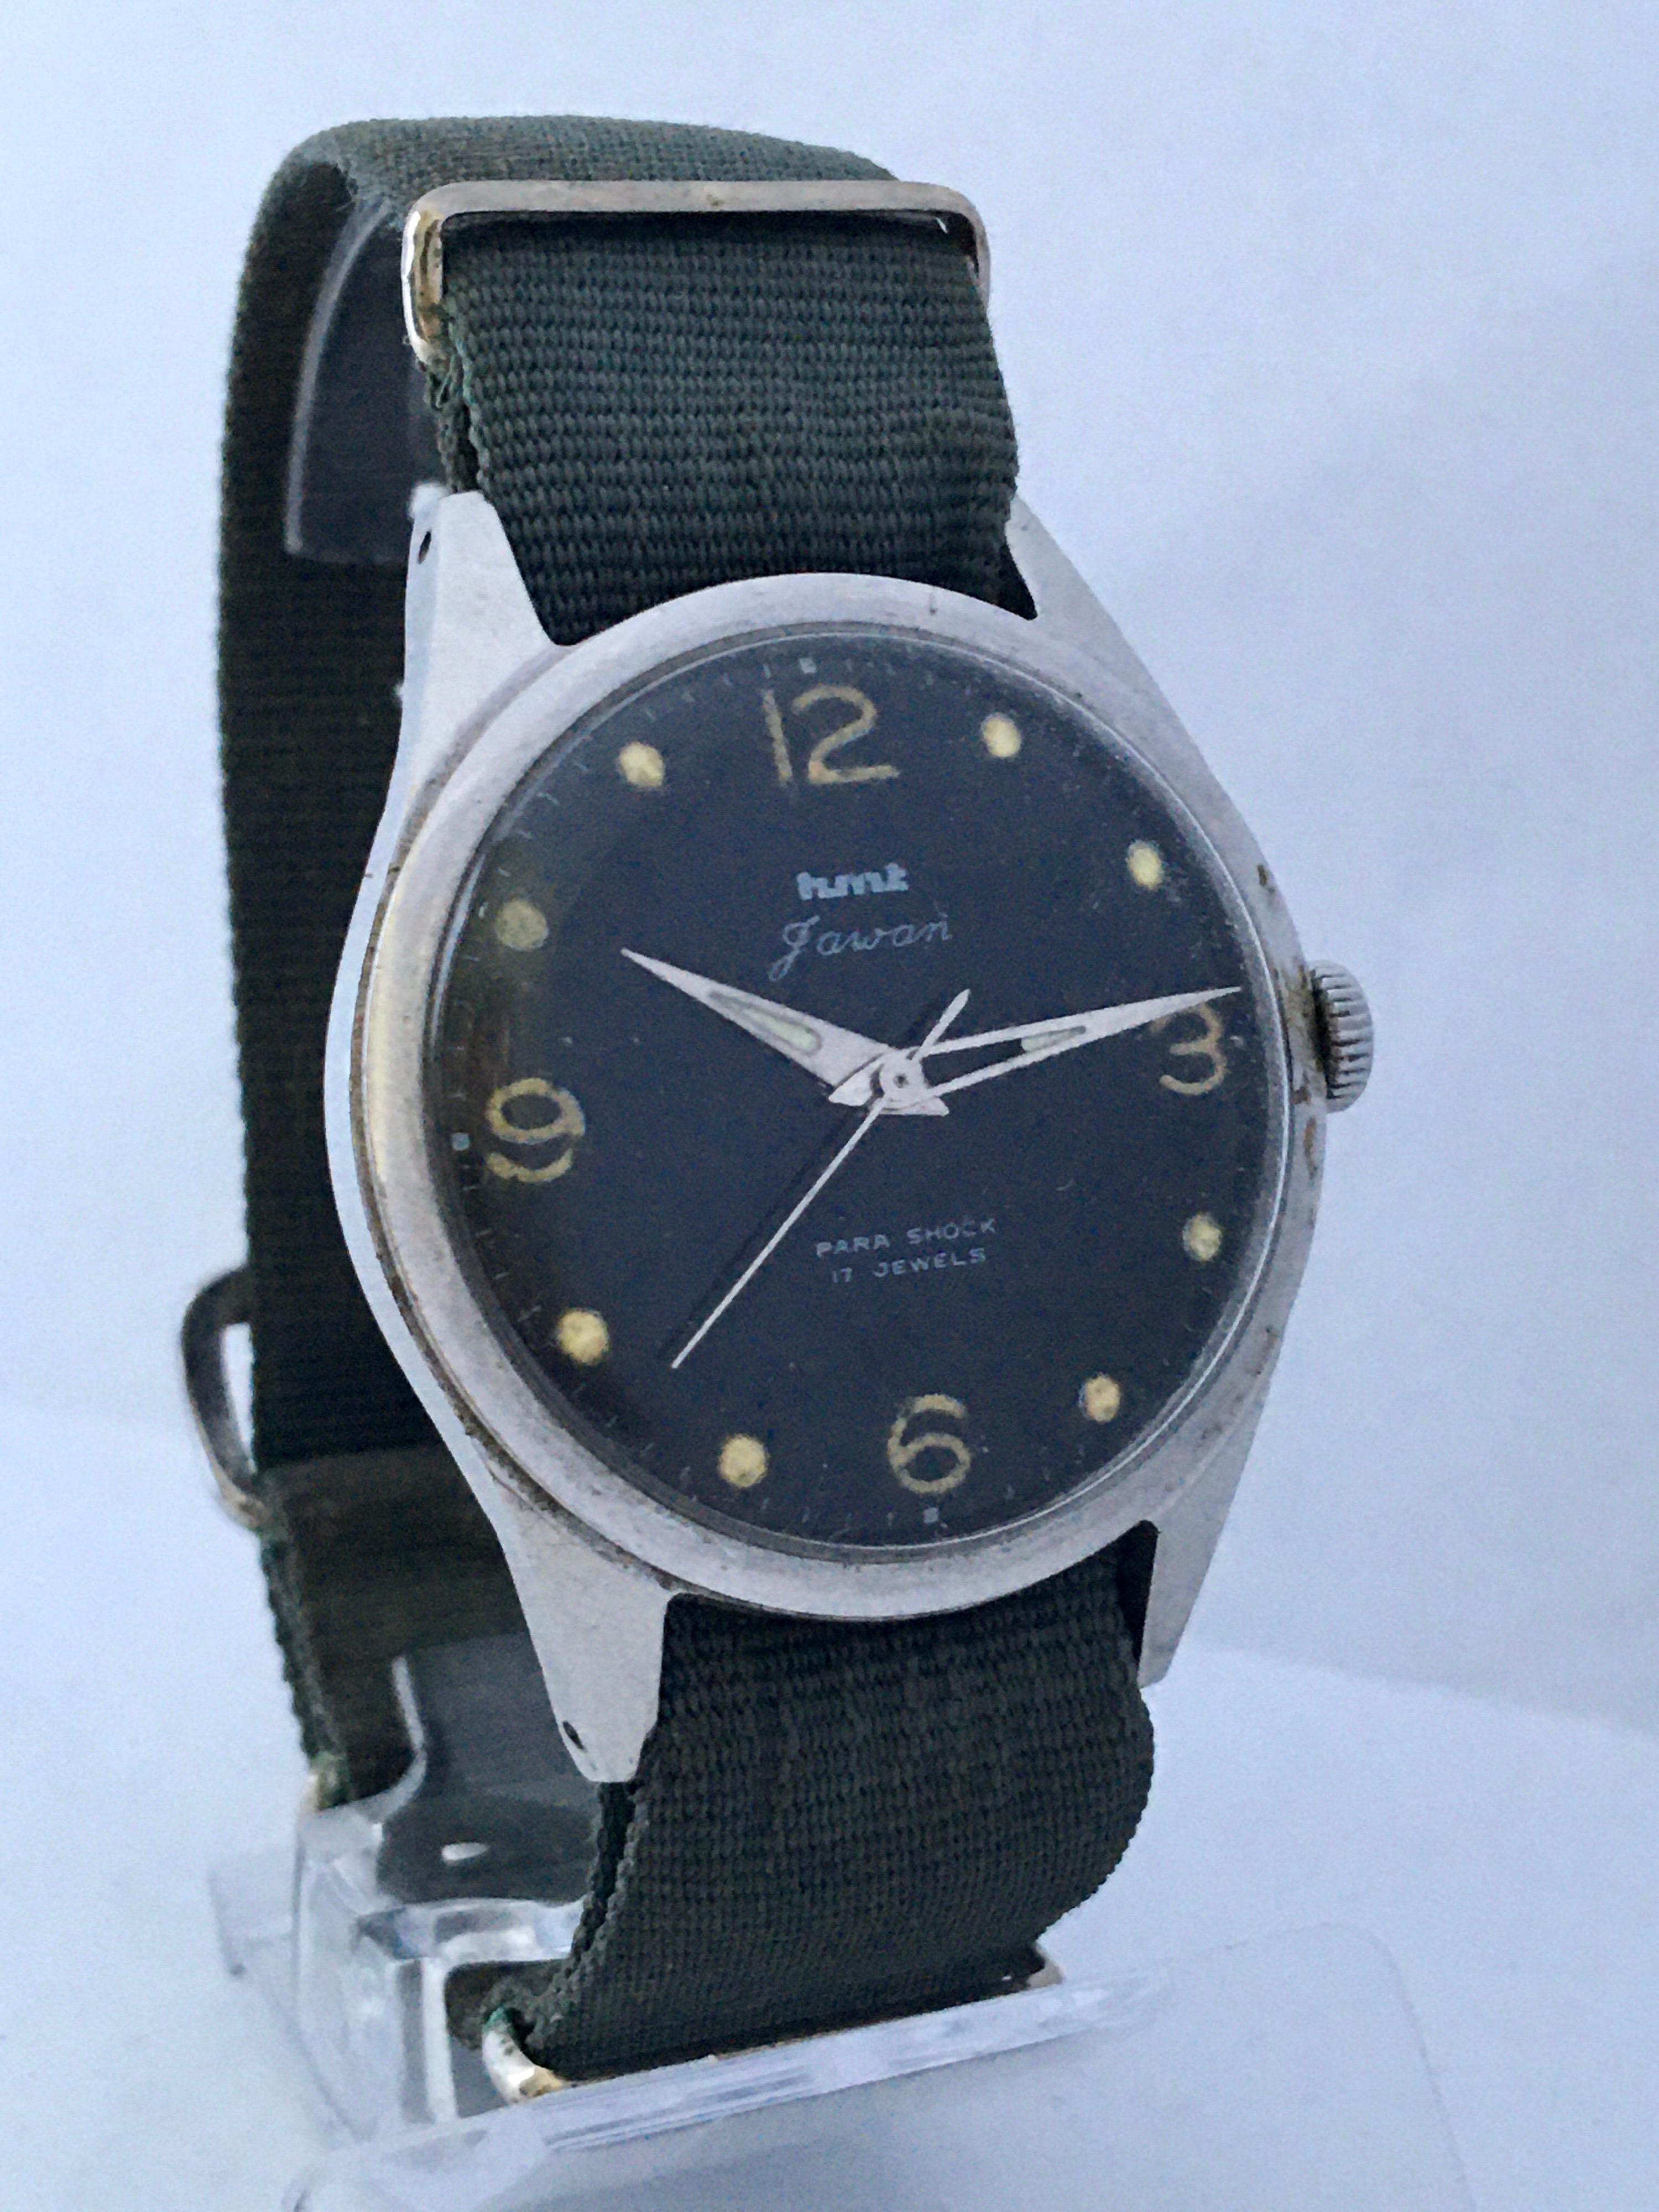 This charming pre-owned 35mm watch diameter vintage hand winding Military Watch is in good working condition and it is ticking well.
Visible signs of ageing and wear with slight scratches on the glass and on the watch case as shown. The strap is a